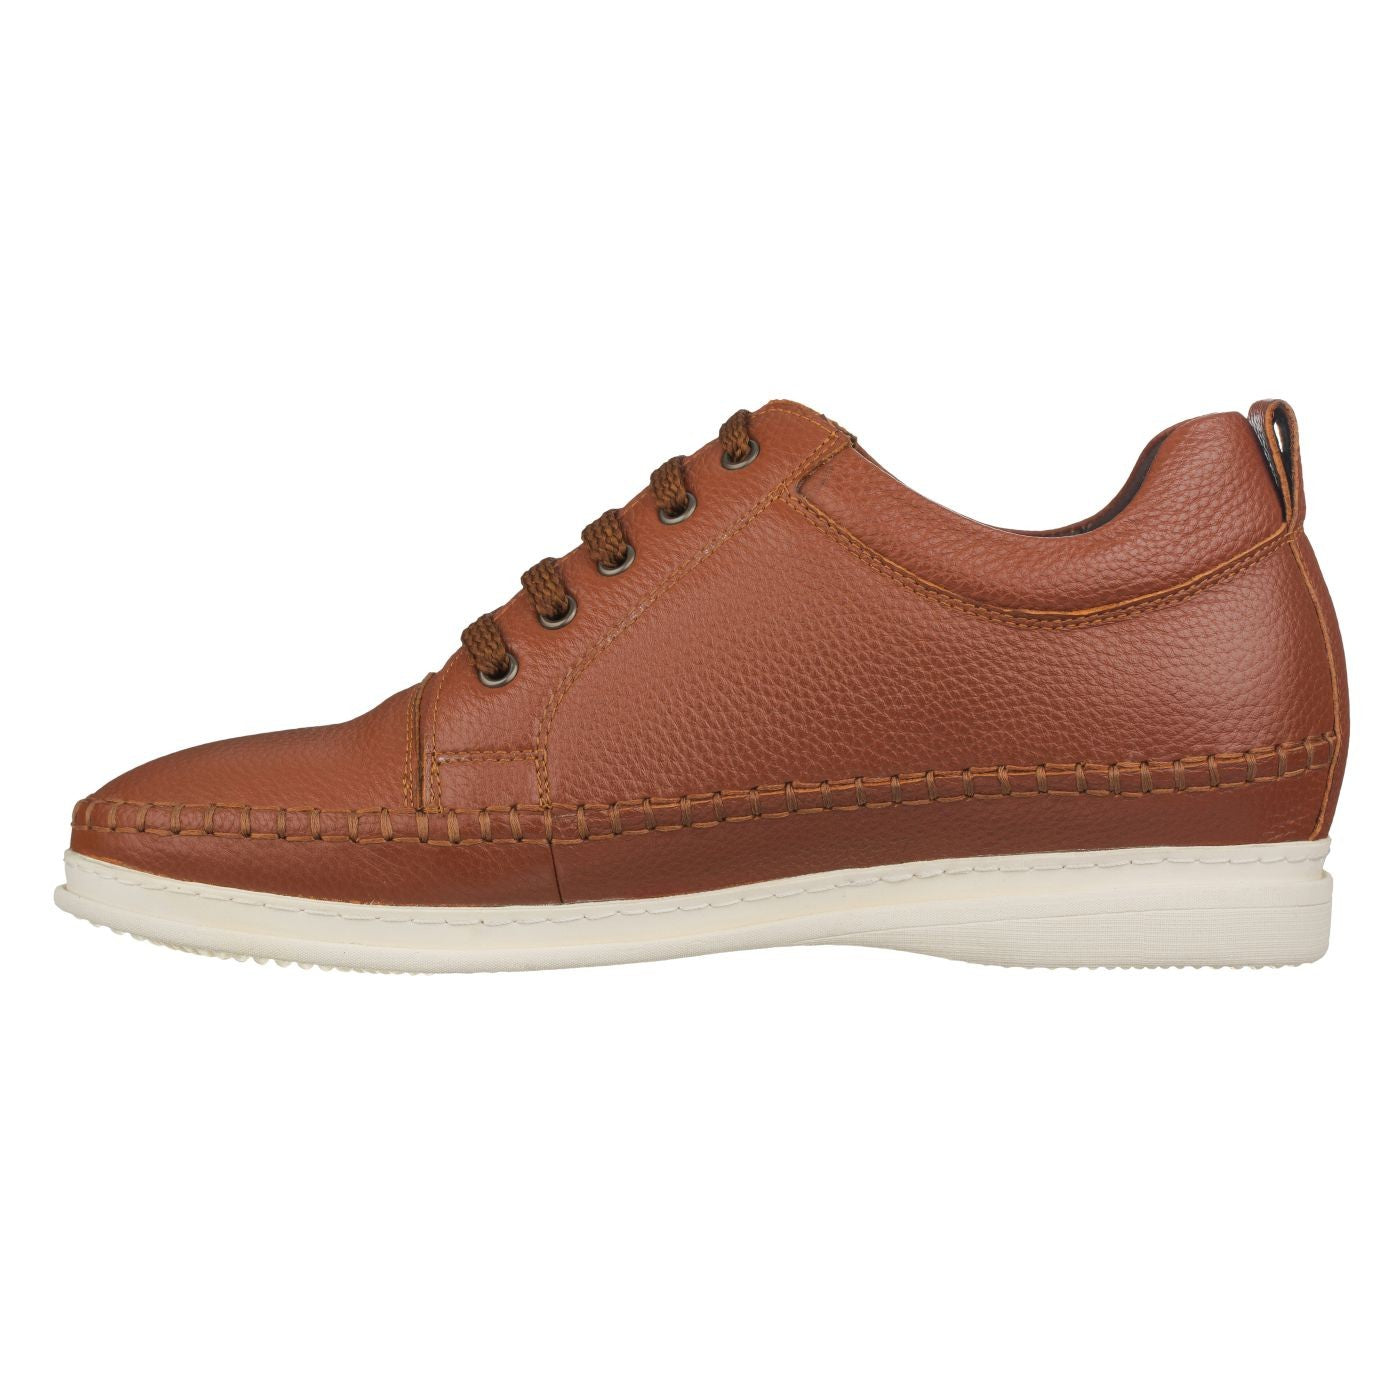 Elevator shoes height increase CALTO Casual 3 Inch Leather Elevator Sneakers - Brown - S4313